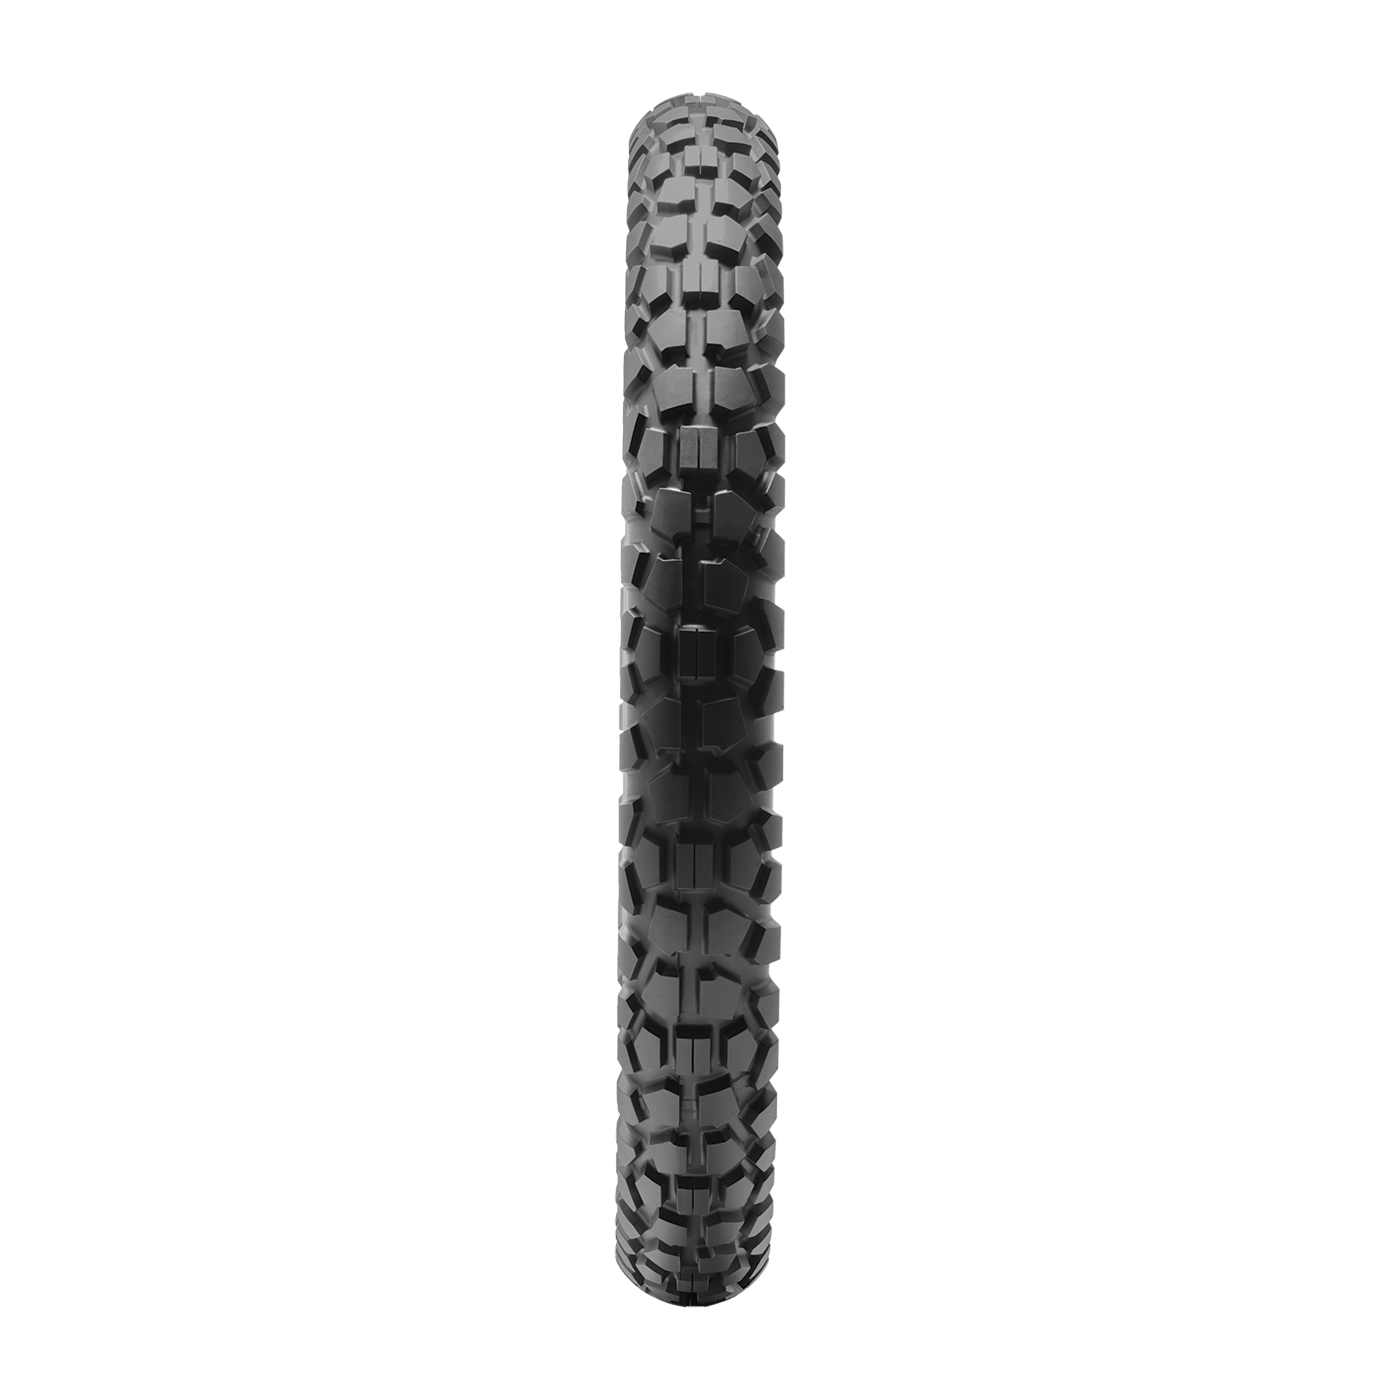 D605 Tires Are Available At Your Local Dunlop Motorcycle Dealer